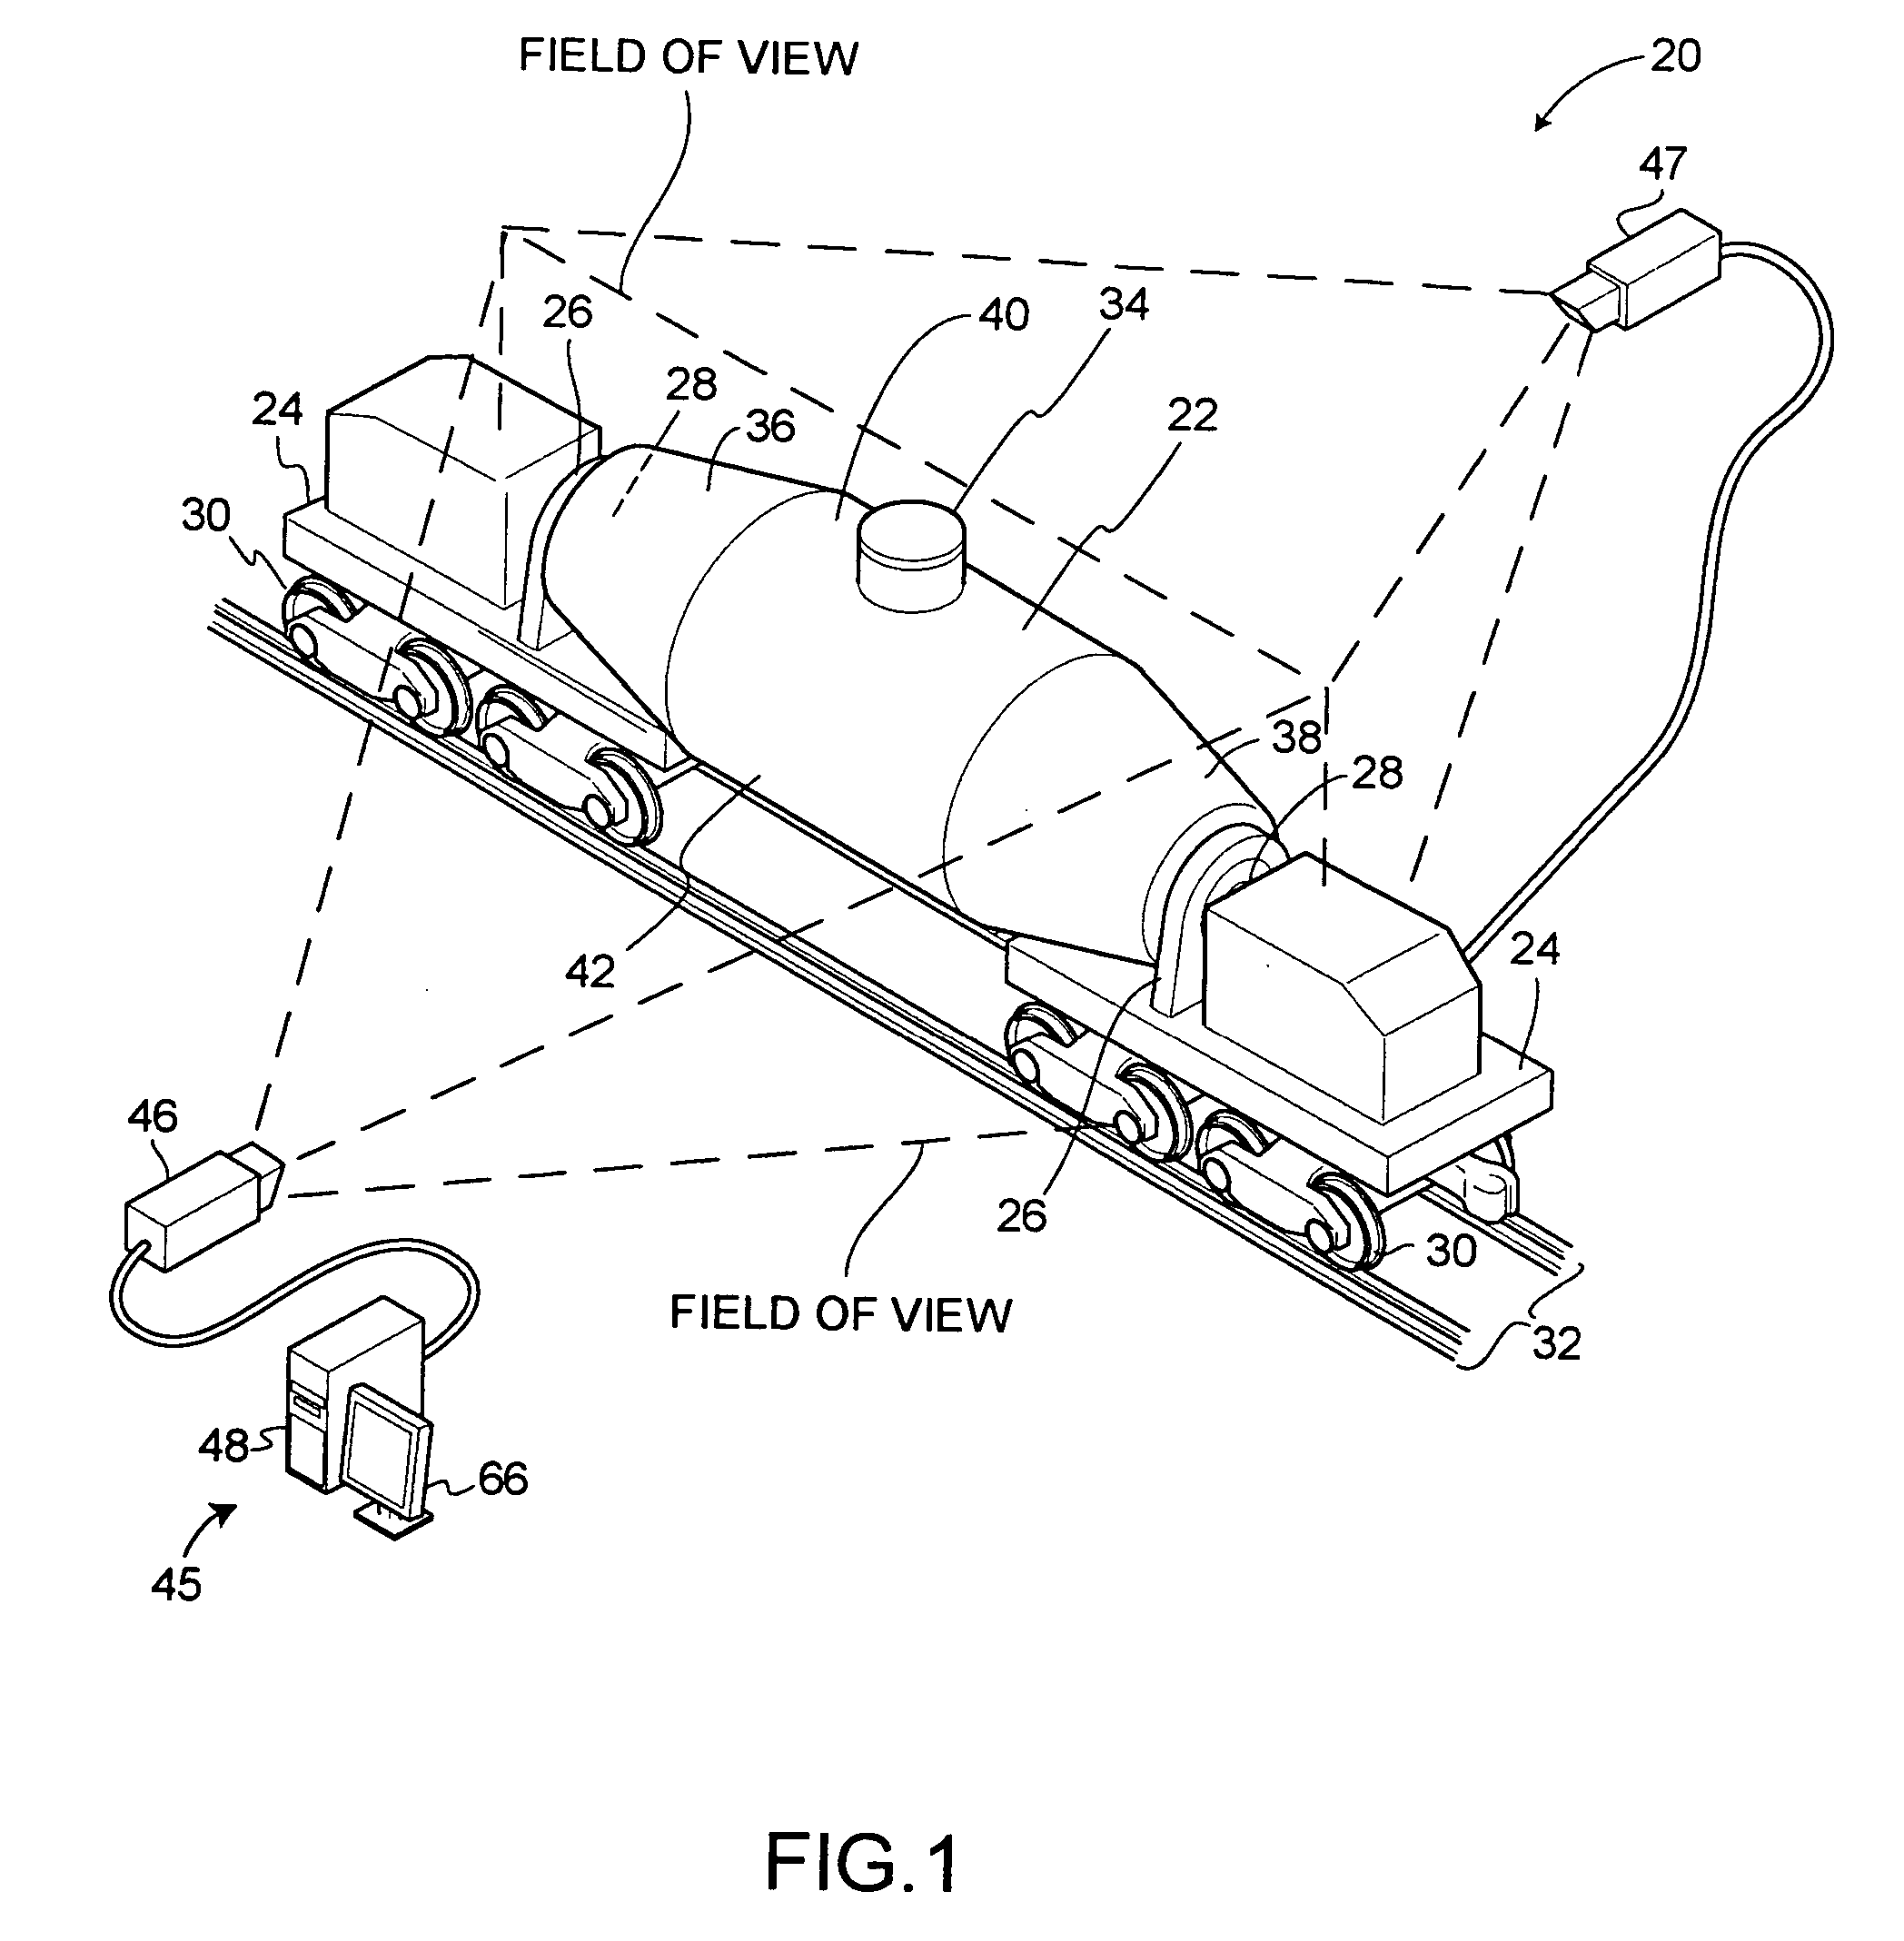 Apparatus and method of sensing the temperature of a molten metal vehicle